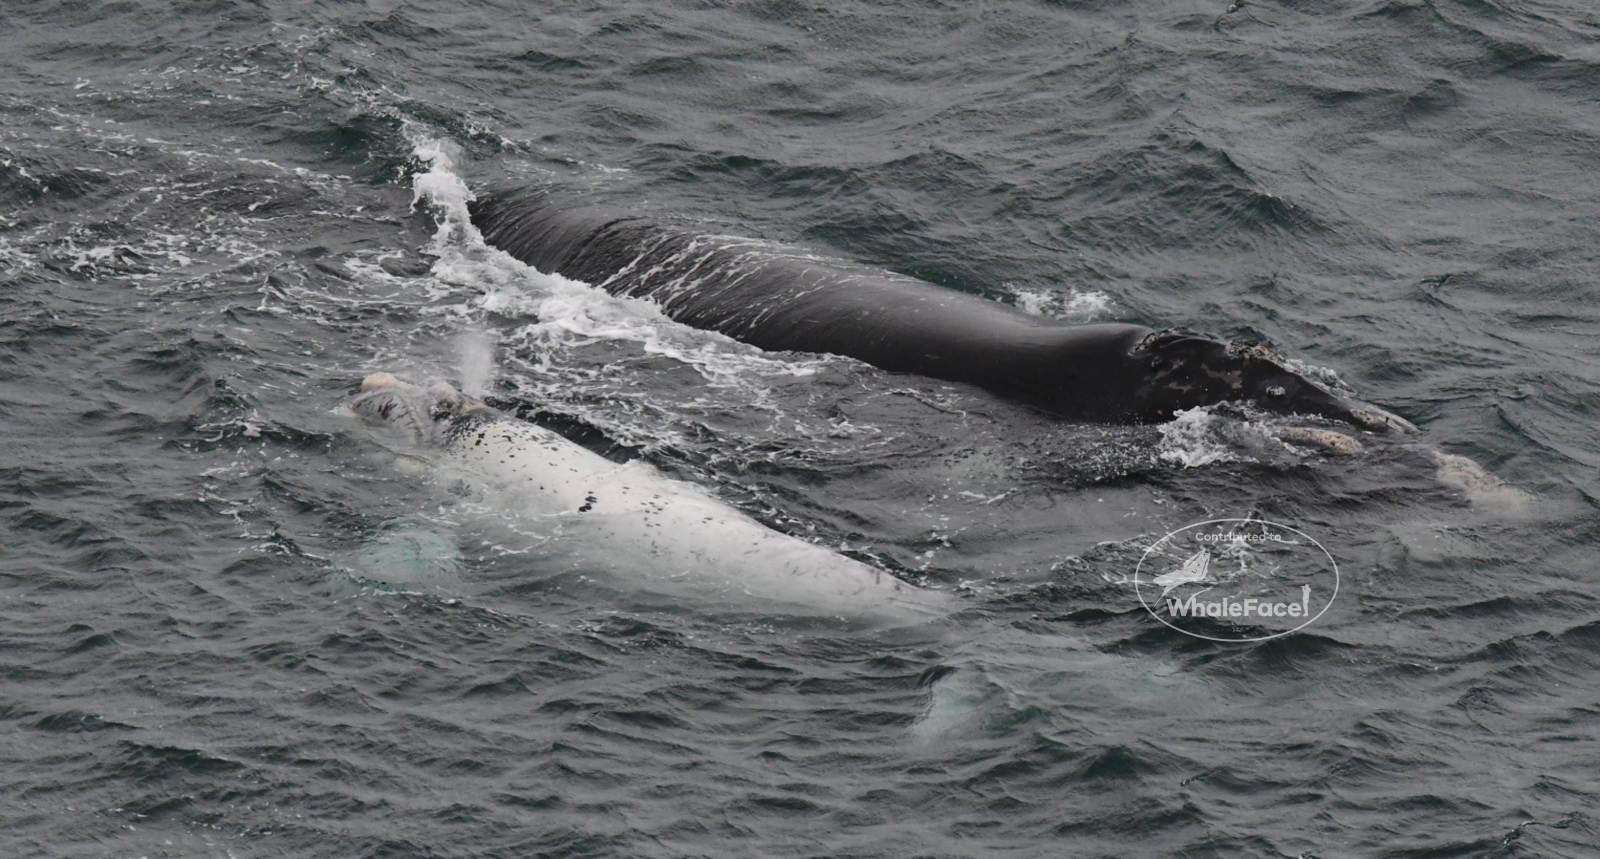 Mother and calf swimming together, calf is a grey morph